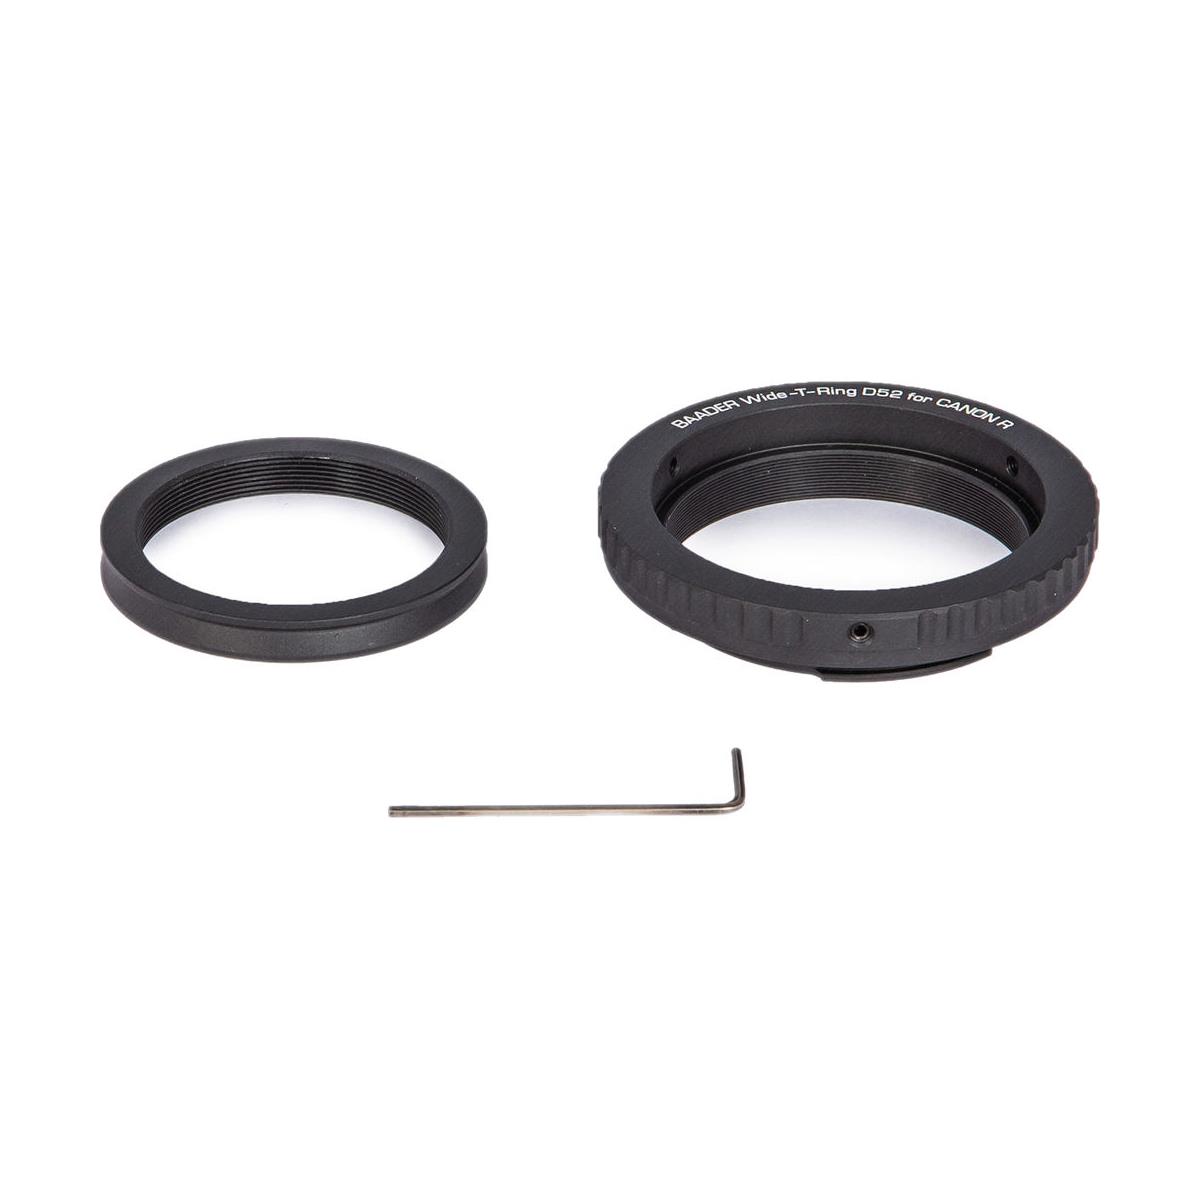 Image of Baader Planetarium Wide T-Ring Set for Canon EOS R Camera